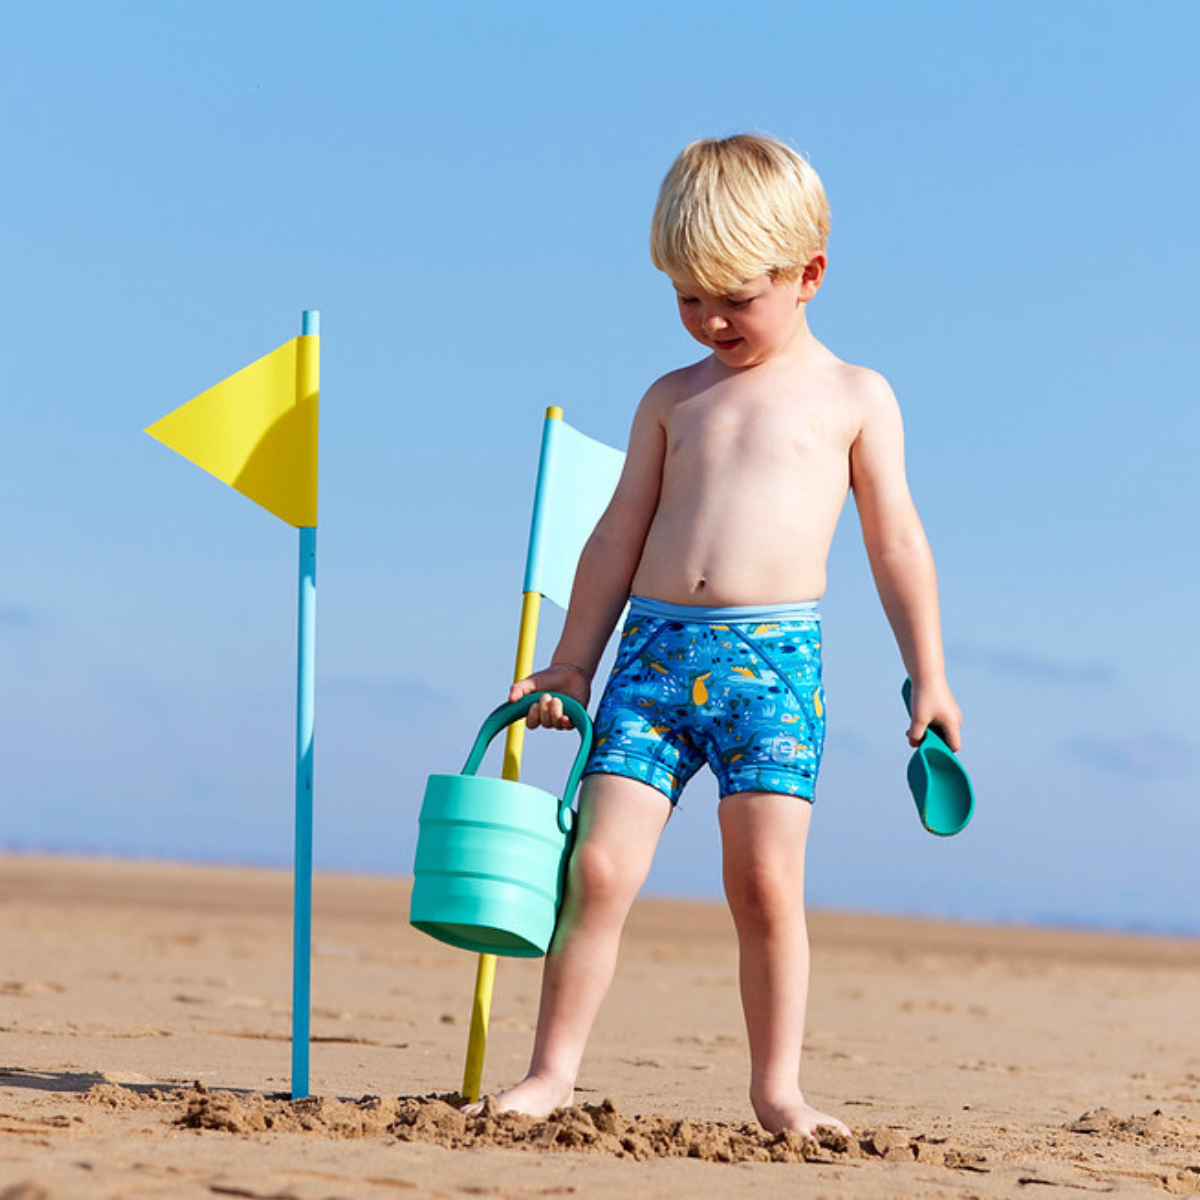 Lifestyle image of toddler sitting by the pool, wearing neoprene swim shorts in blue with light blue waist and swamp themed print, including crocodiles, frogs, snails and more.